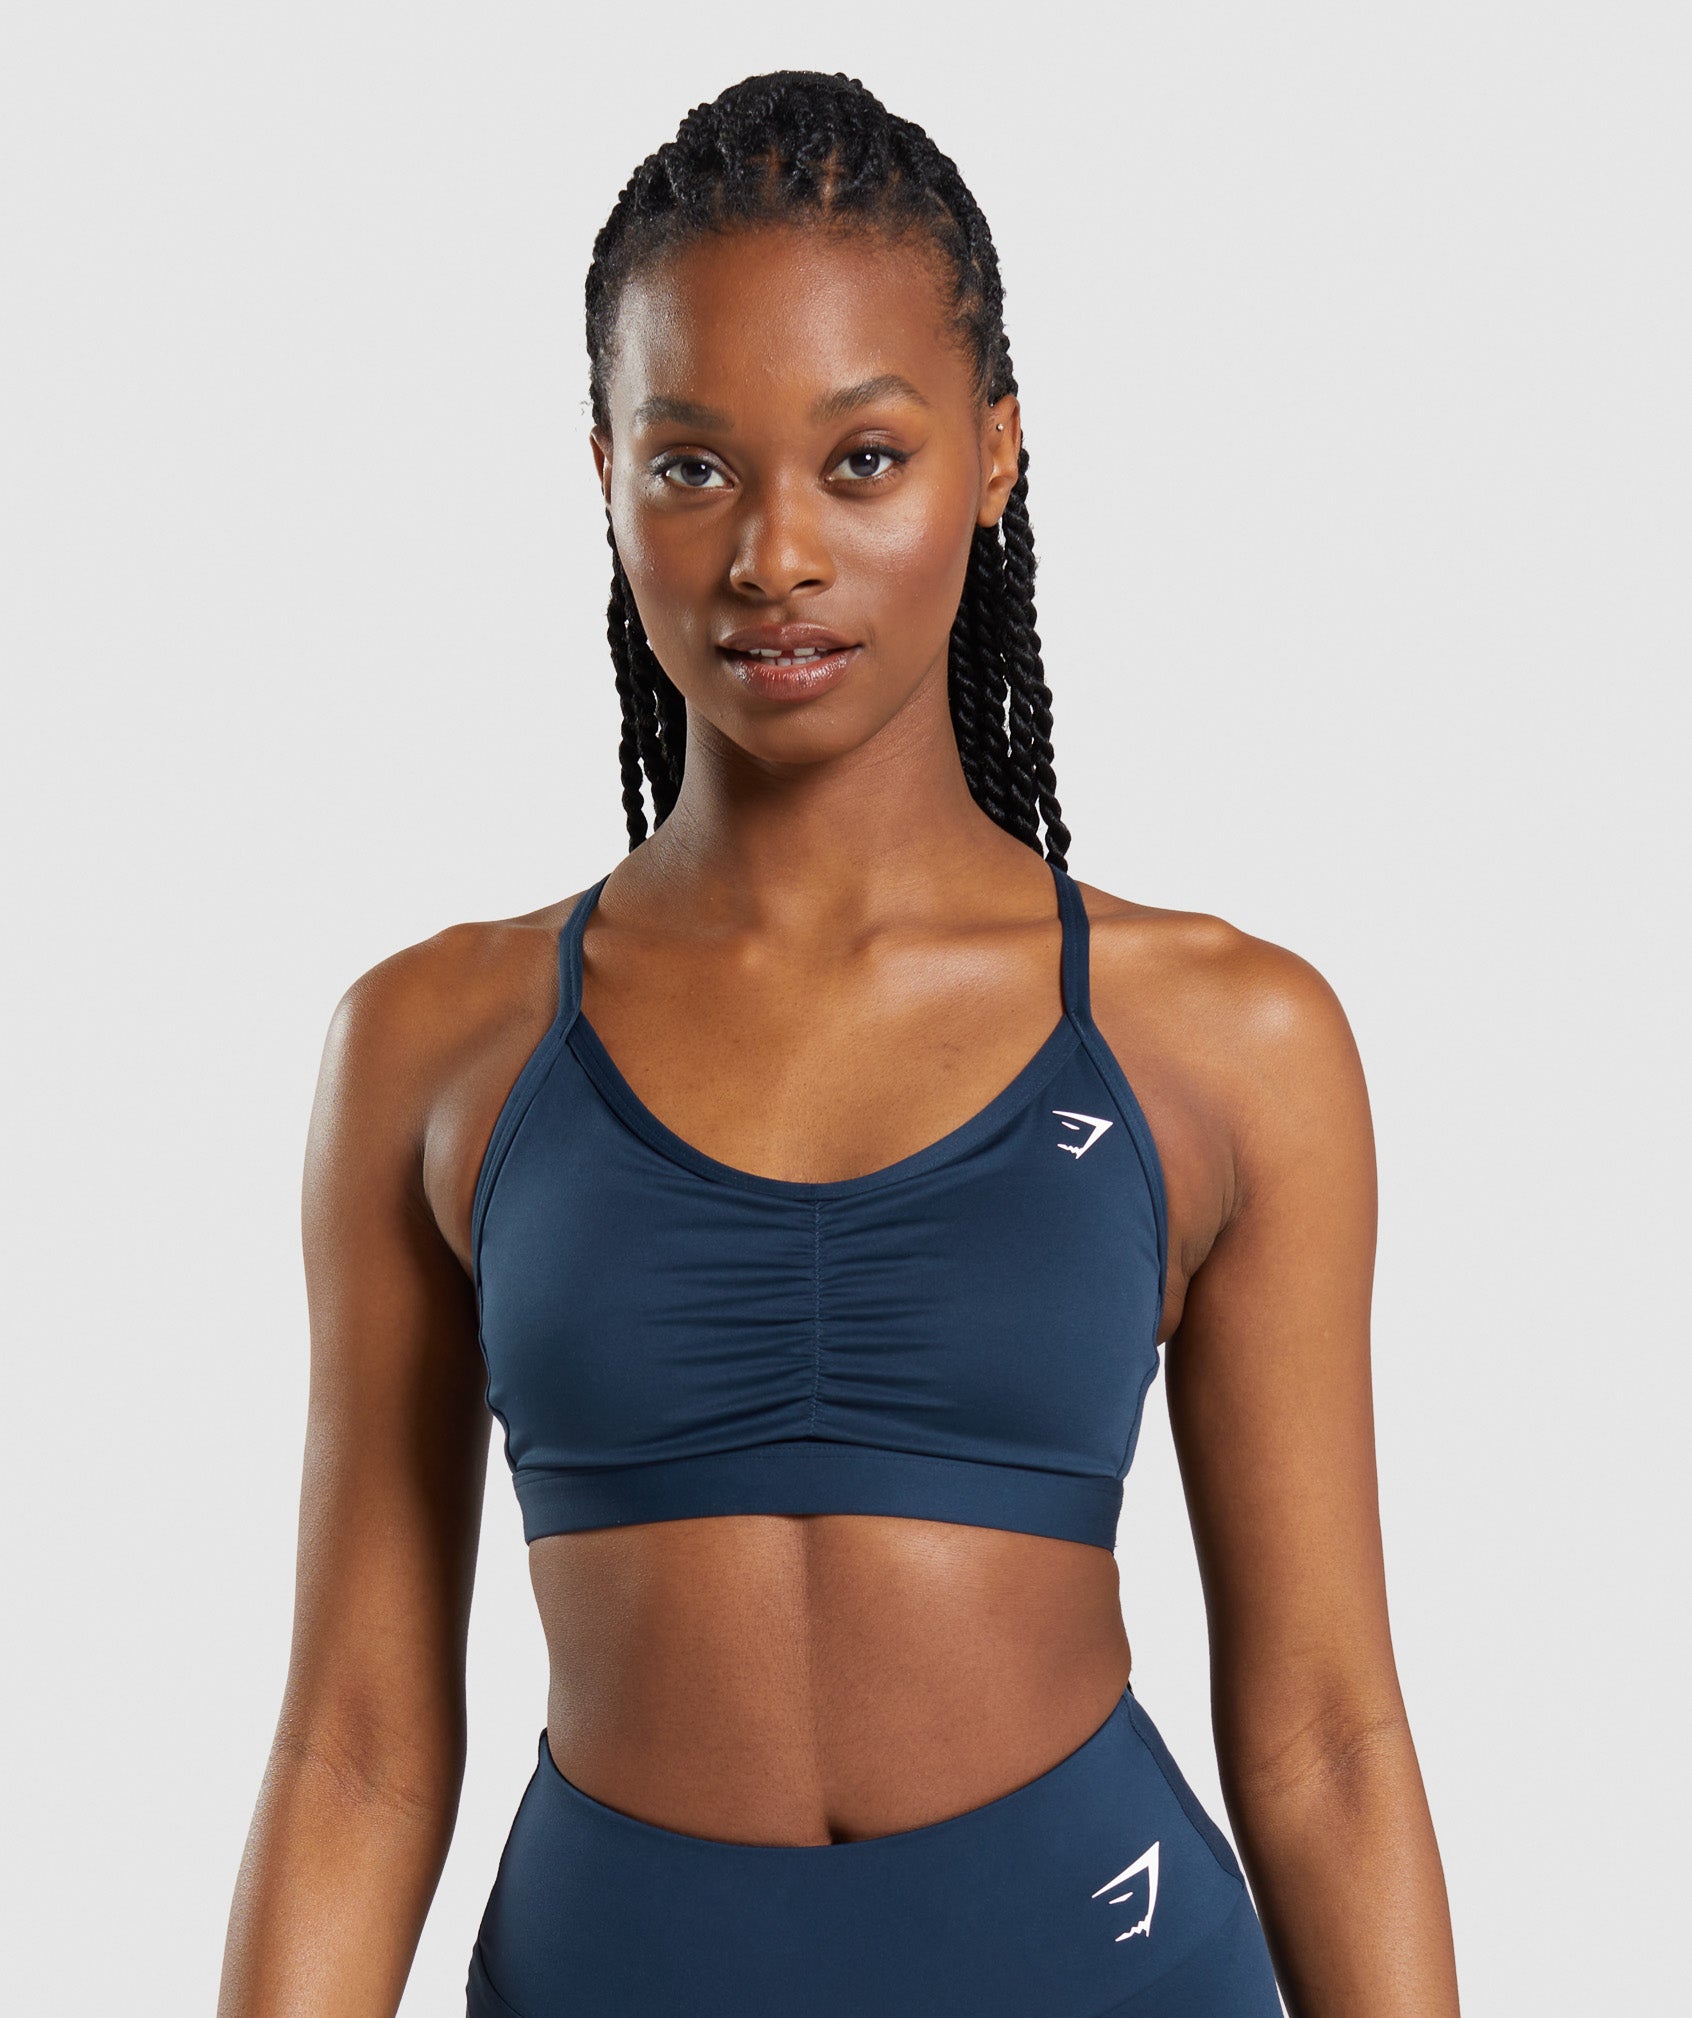 Gymshark Ruched Sports Bra - Winter Teal